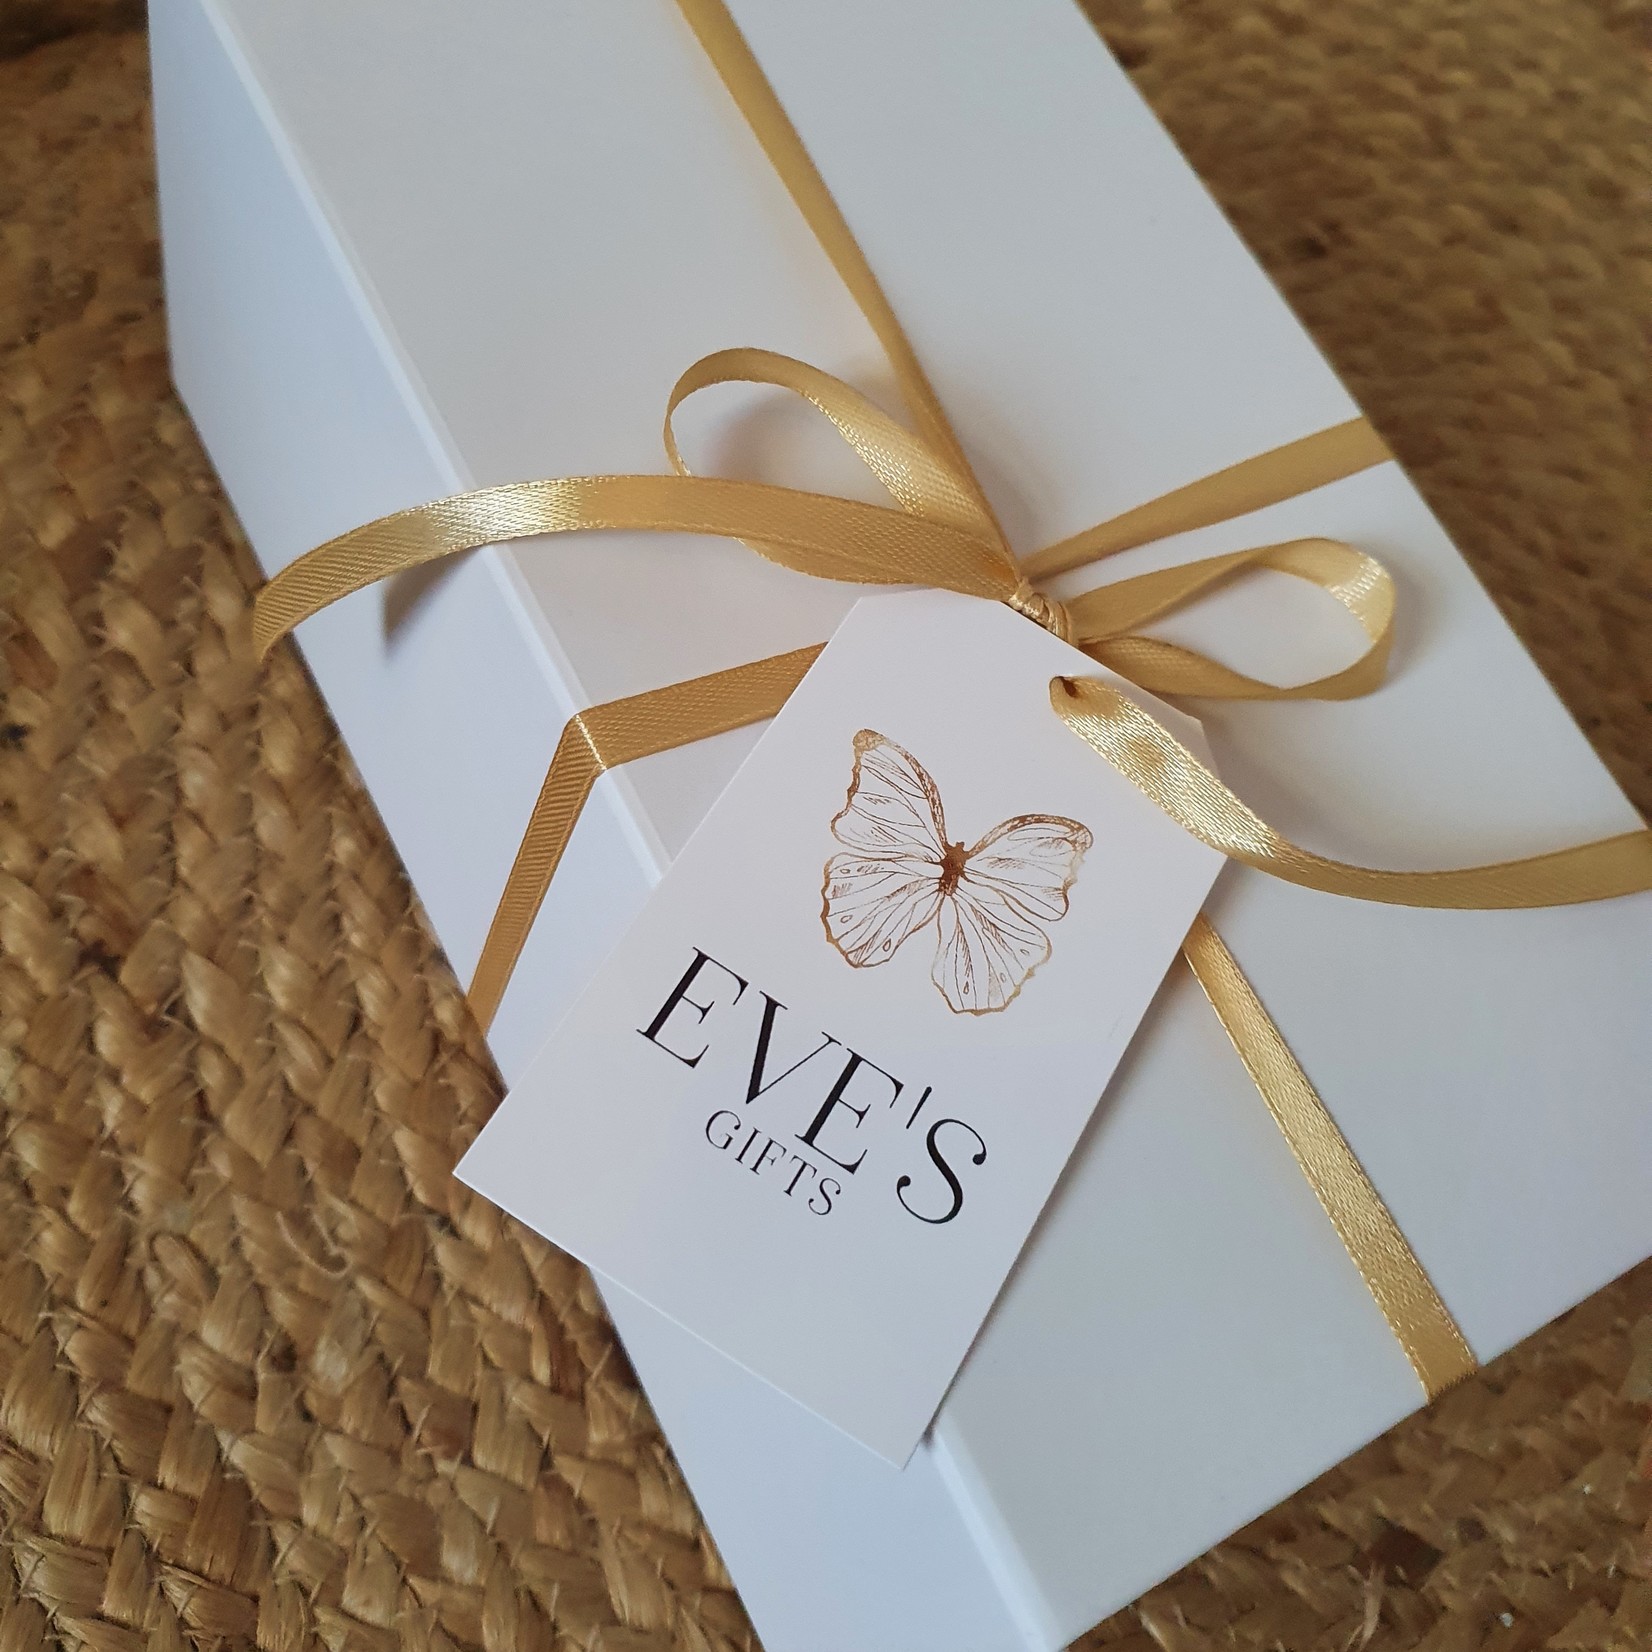 Eve's Gifts Gift box luxury soap and gold plated earrings